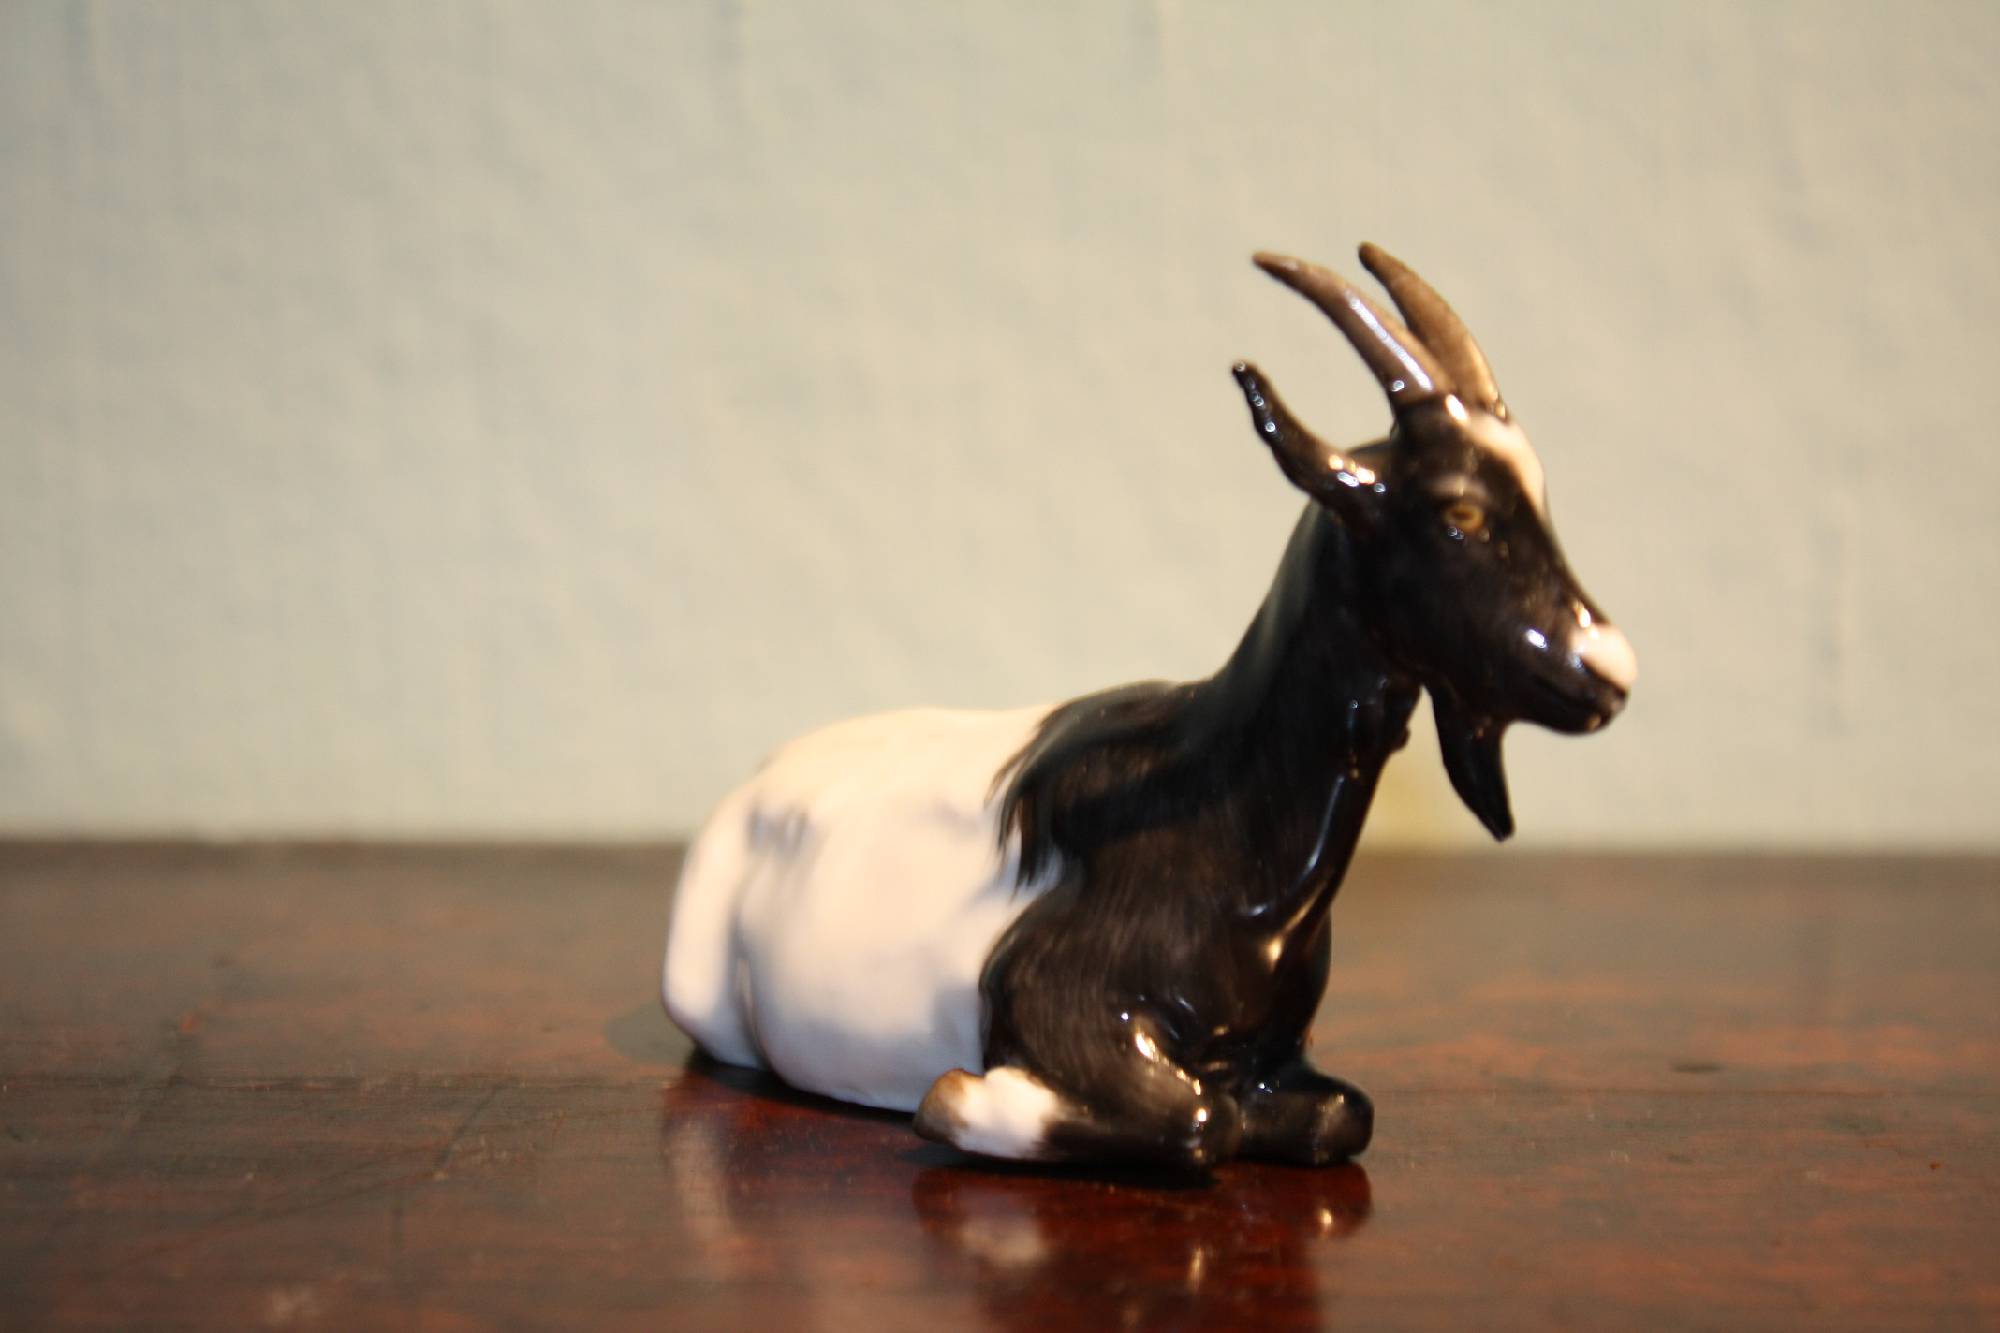 A very small vintage antique 1900 hand-painted Meissen porcelain figurine montain goat